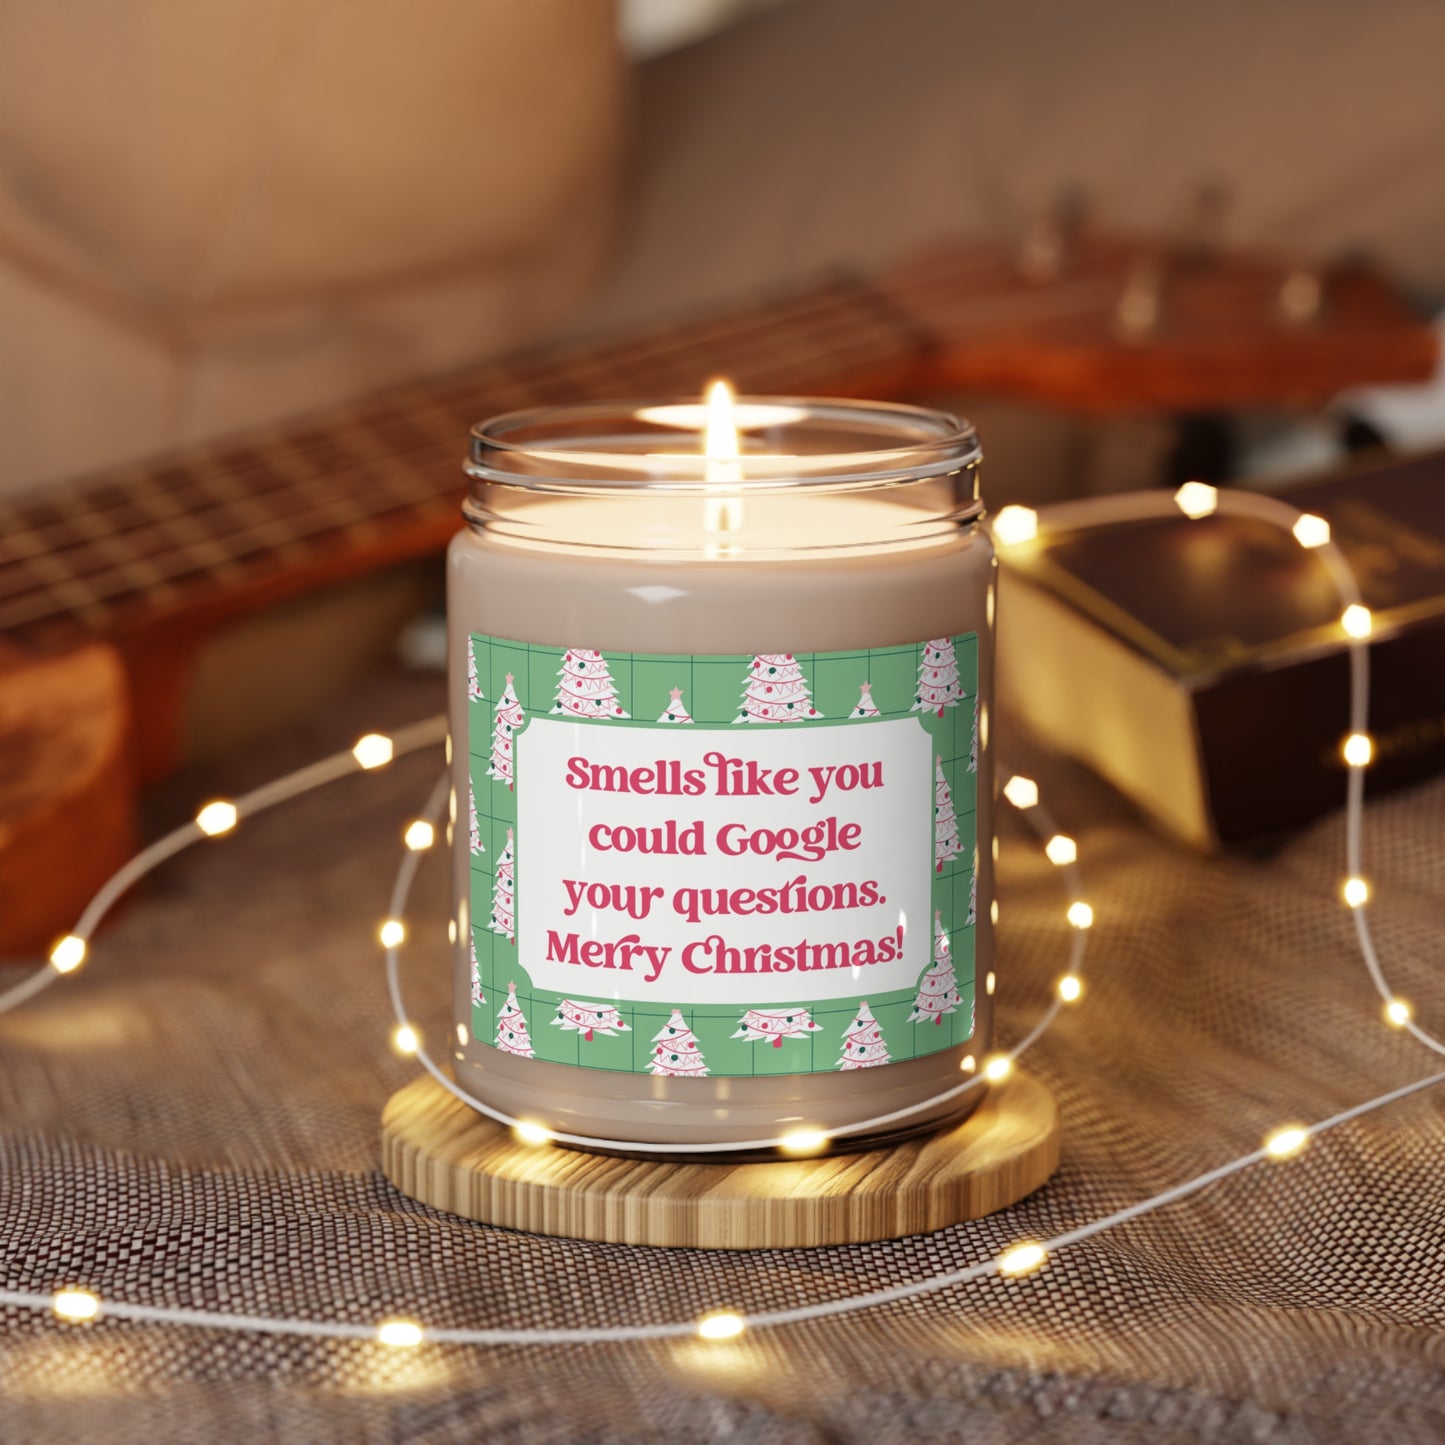 Smells Like You Could Google Your Questions. Merry Christmas! Candle